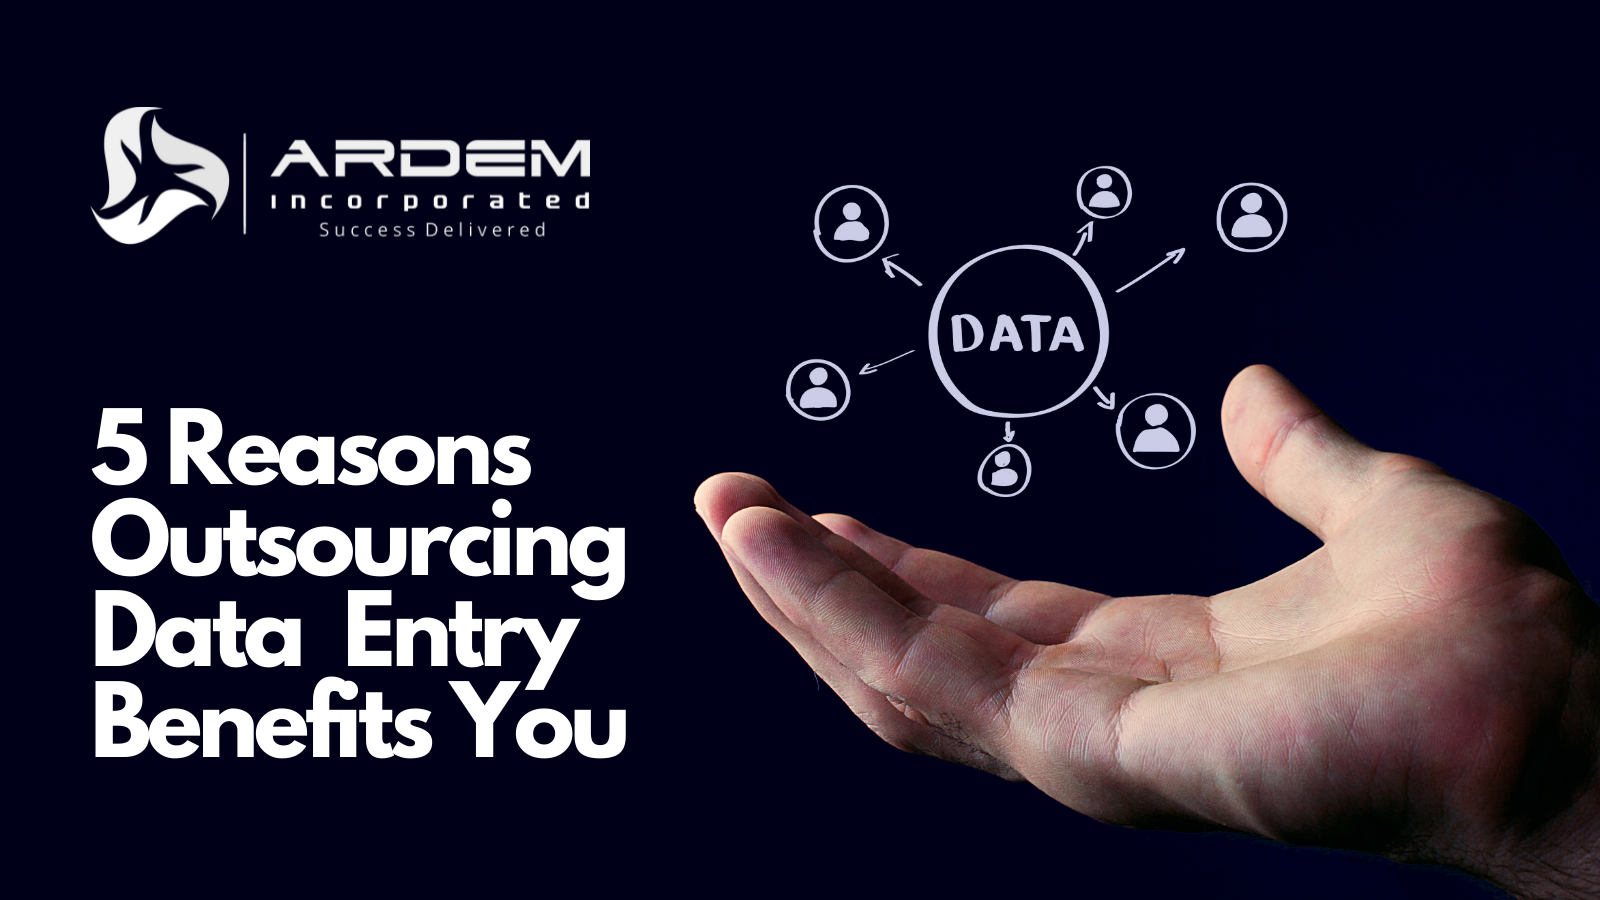 5 Reasons Outsourcing Data Entry Benefits You